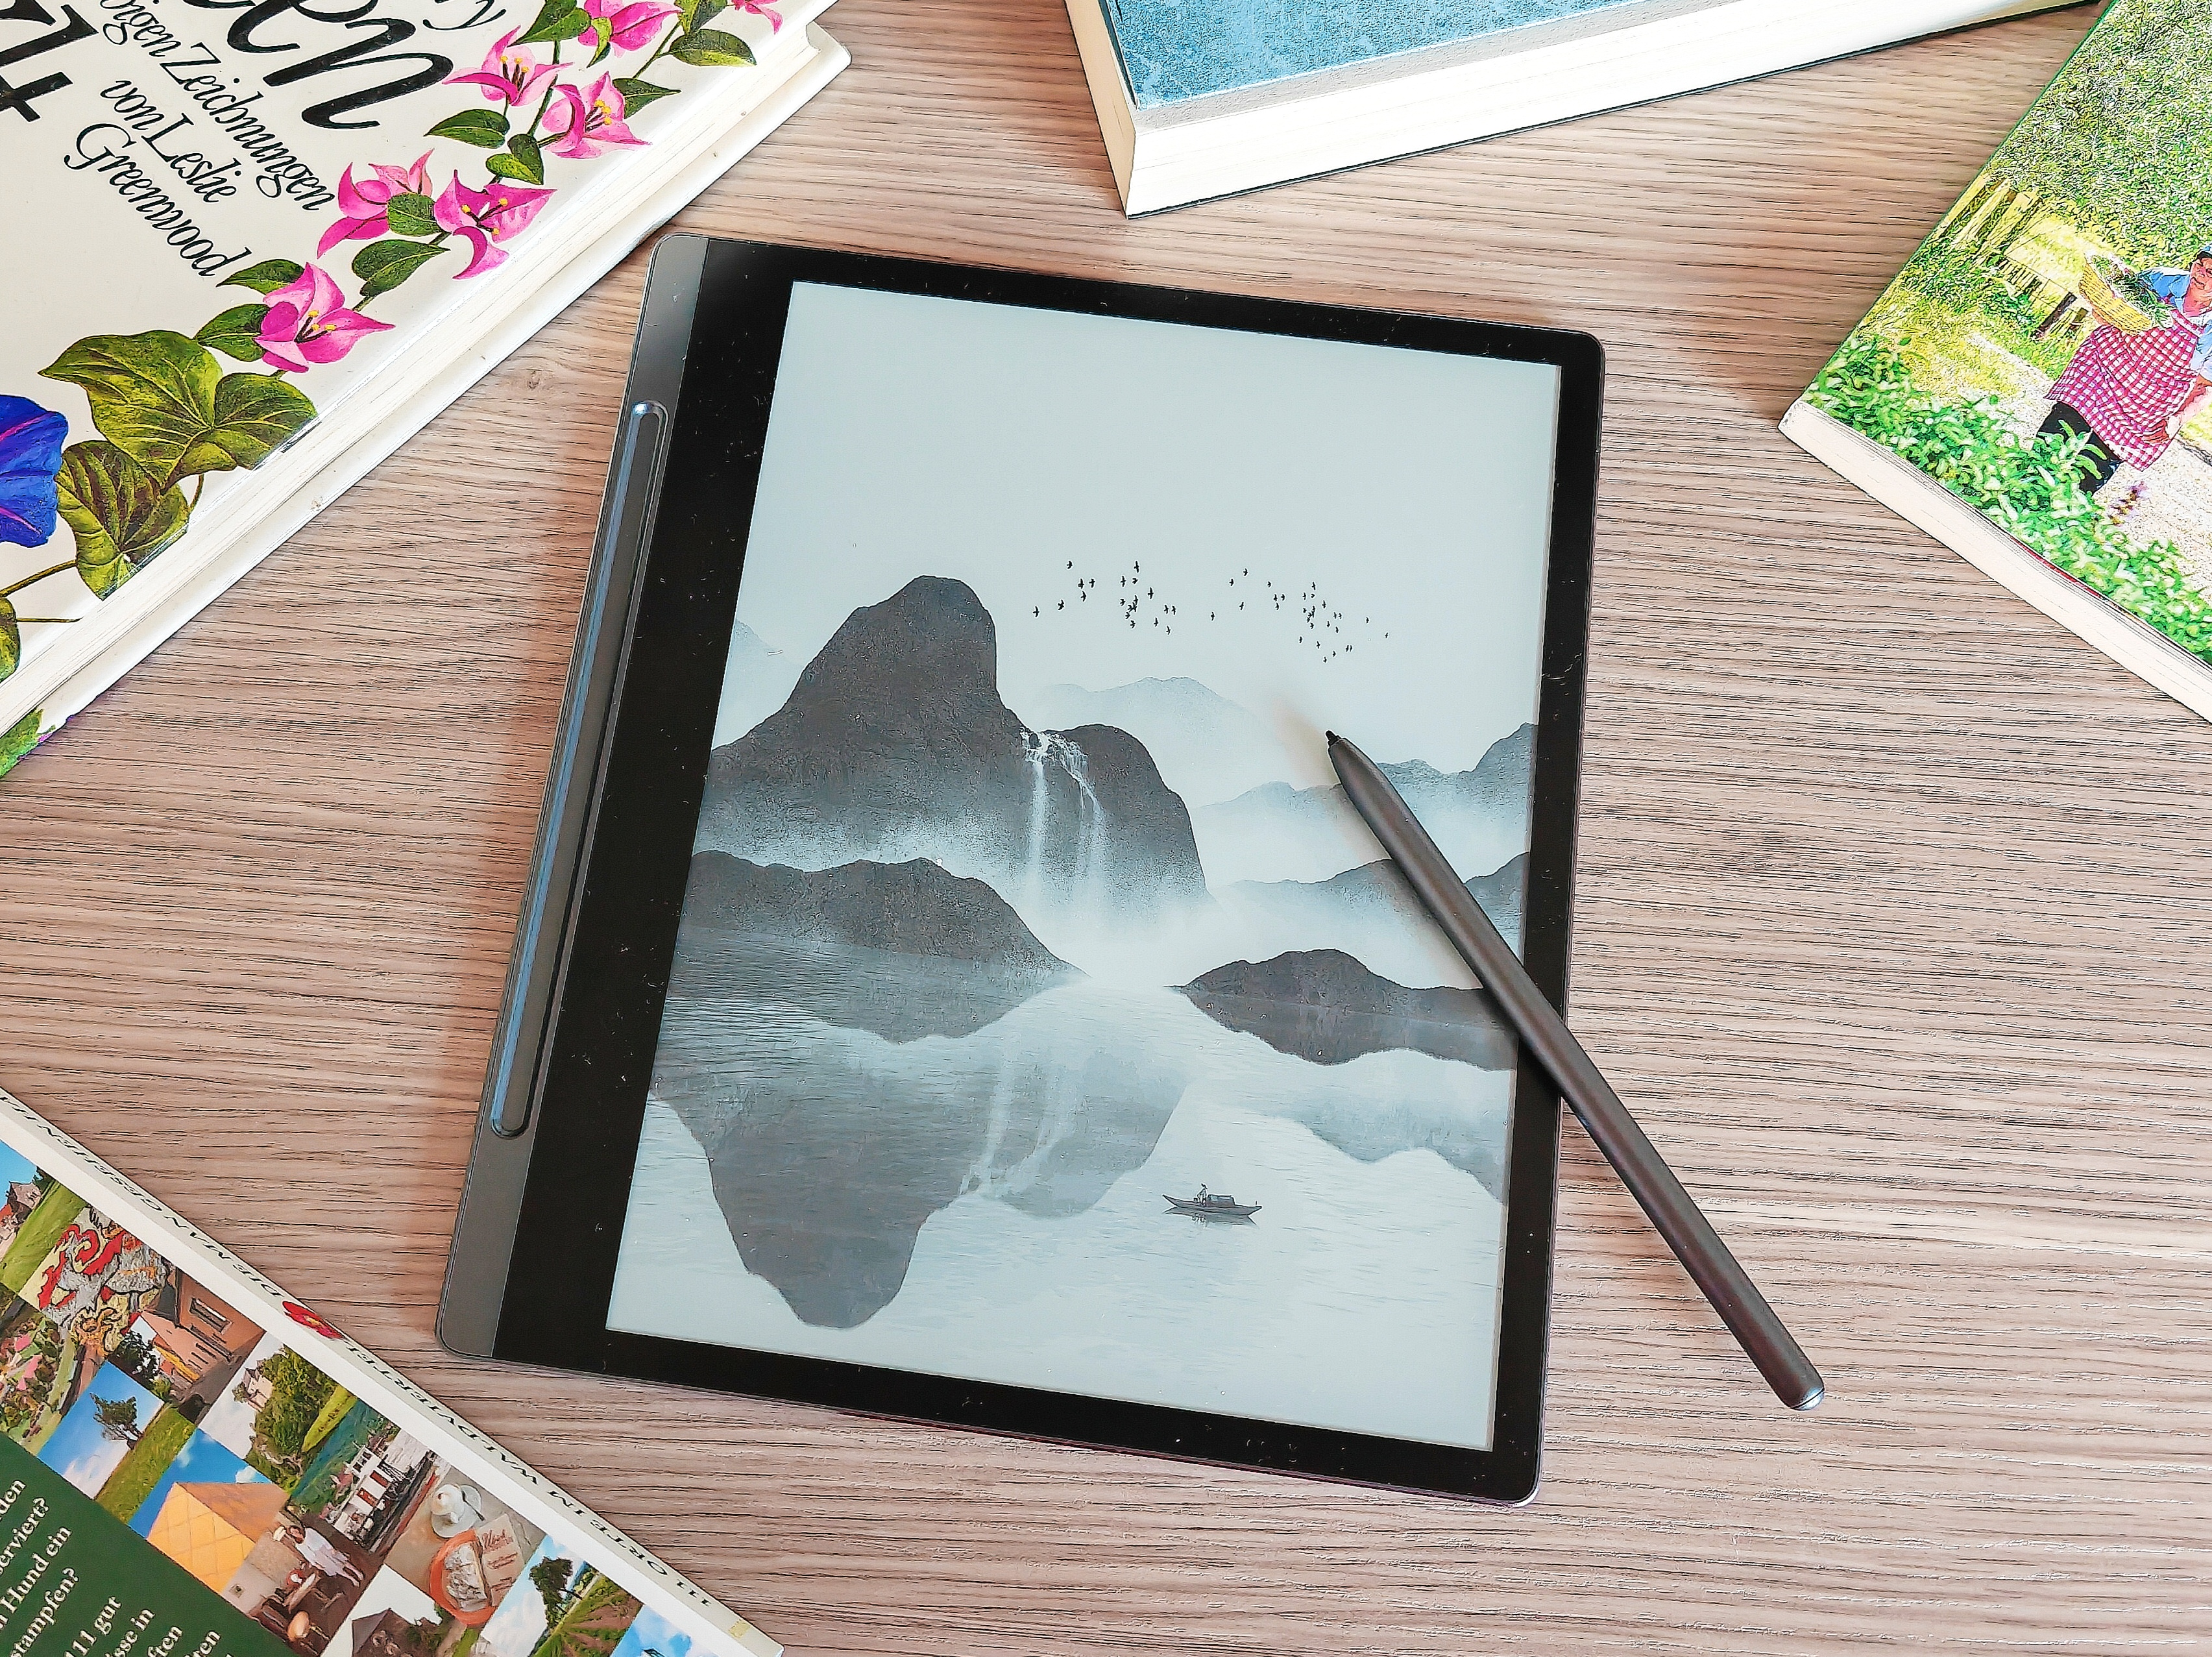 PaperTab: Revolutionary paper tablet reveals future tablets to be